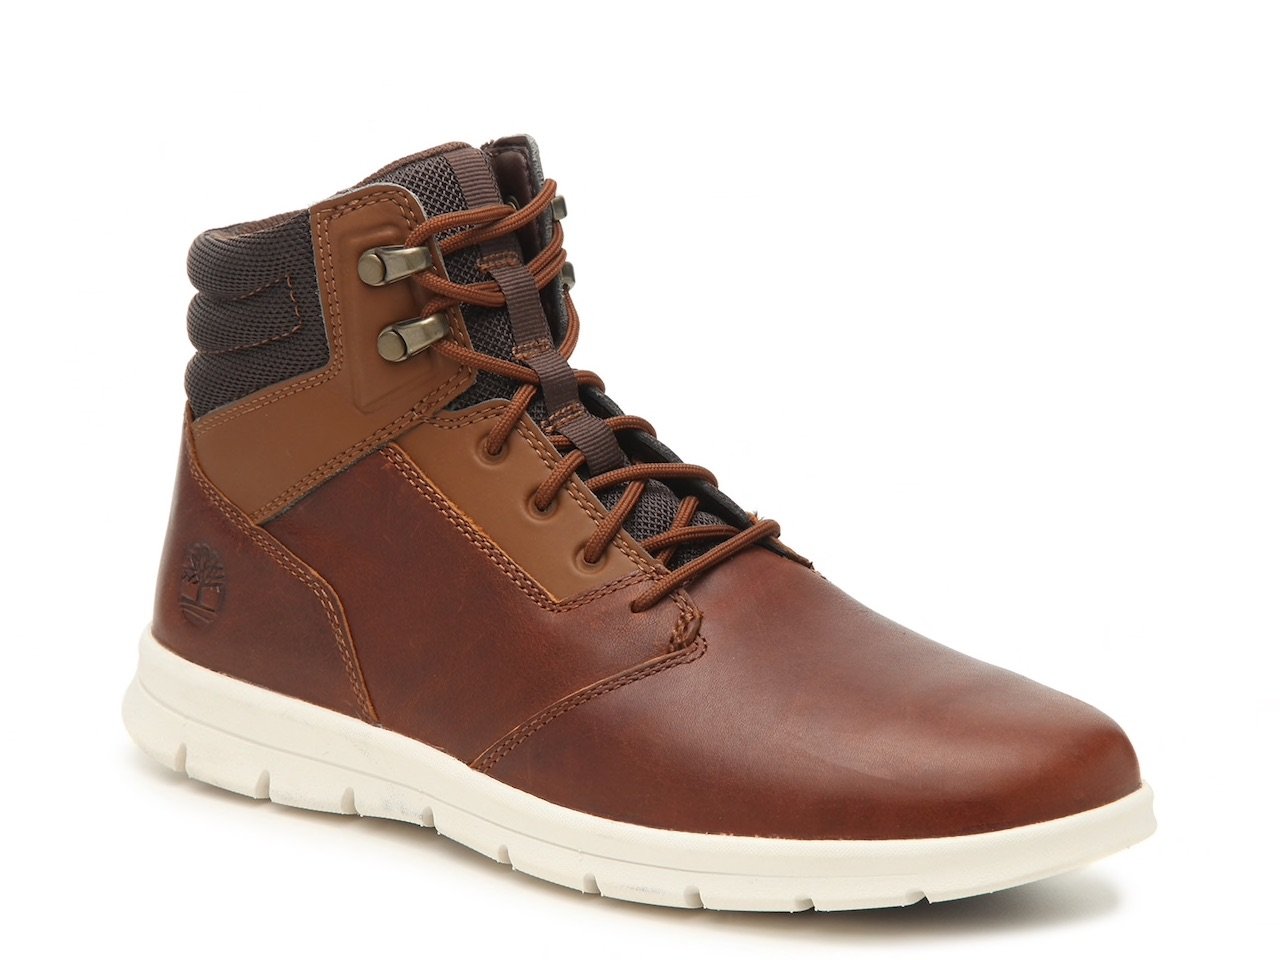 Timberland sneaker boots